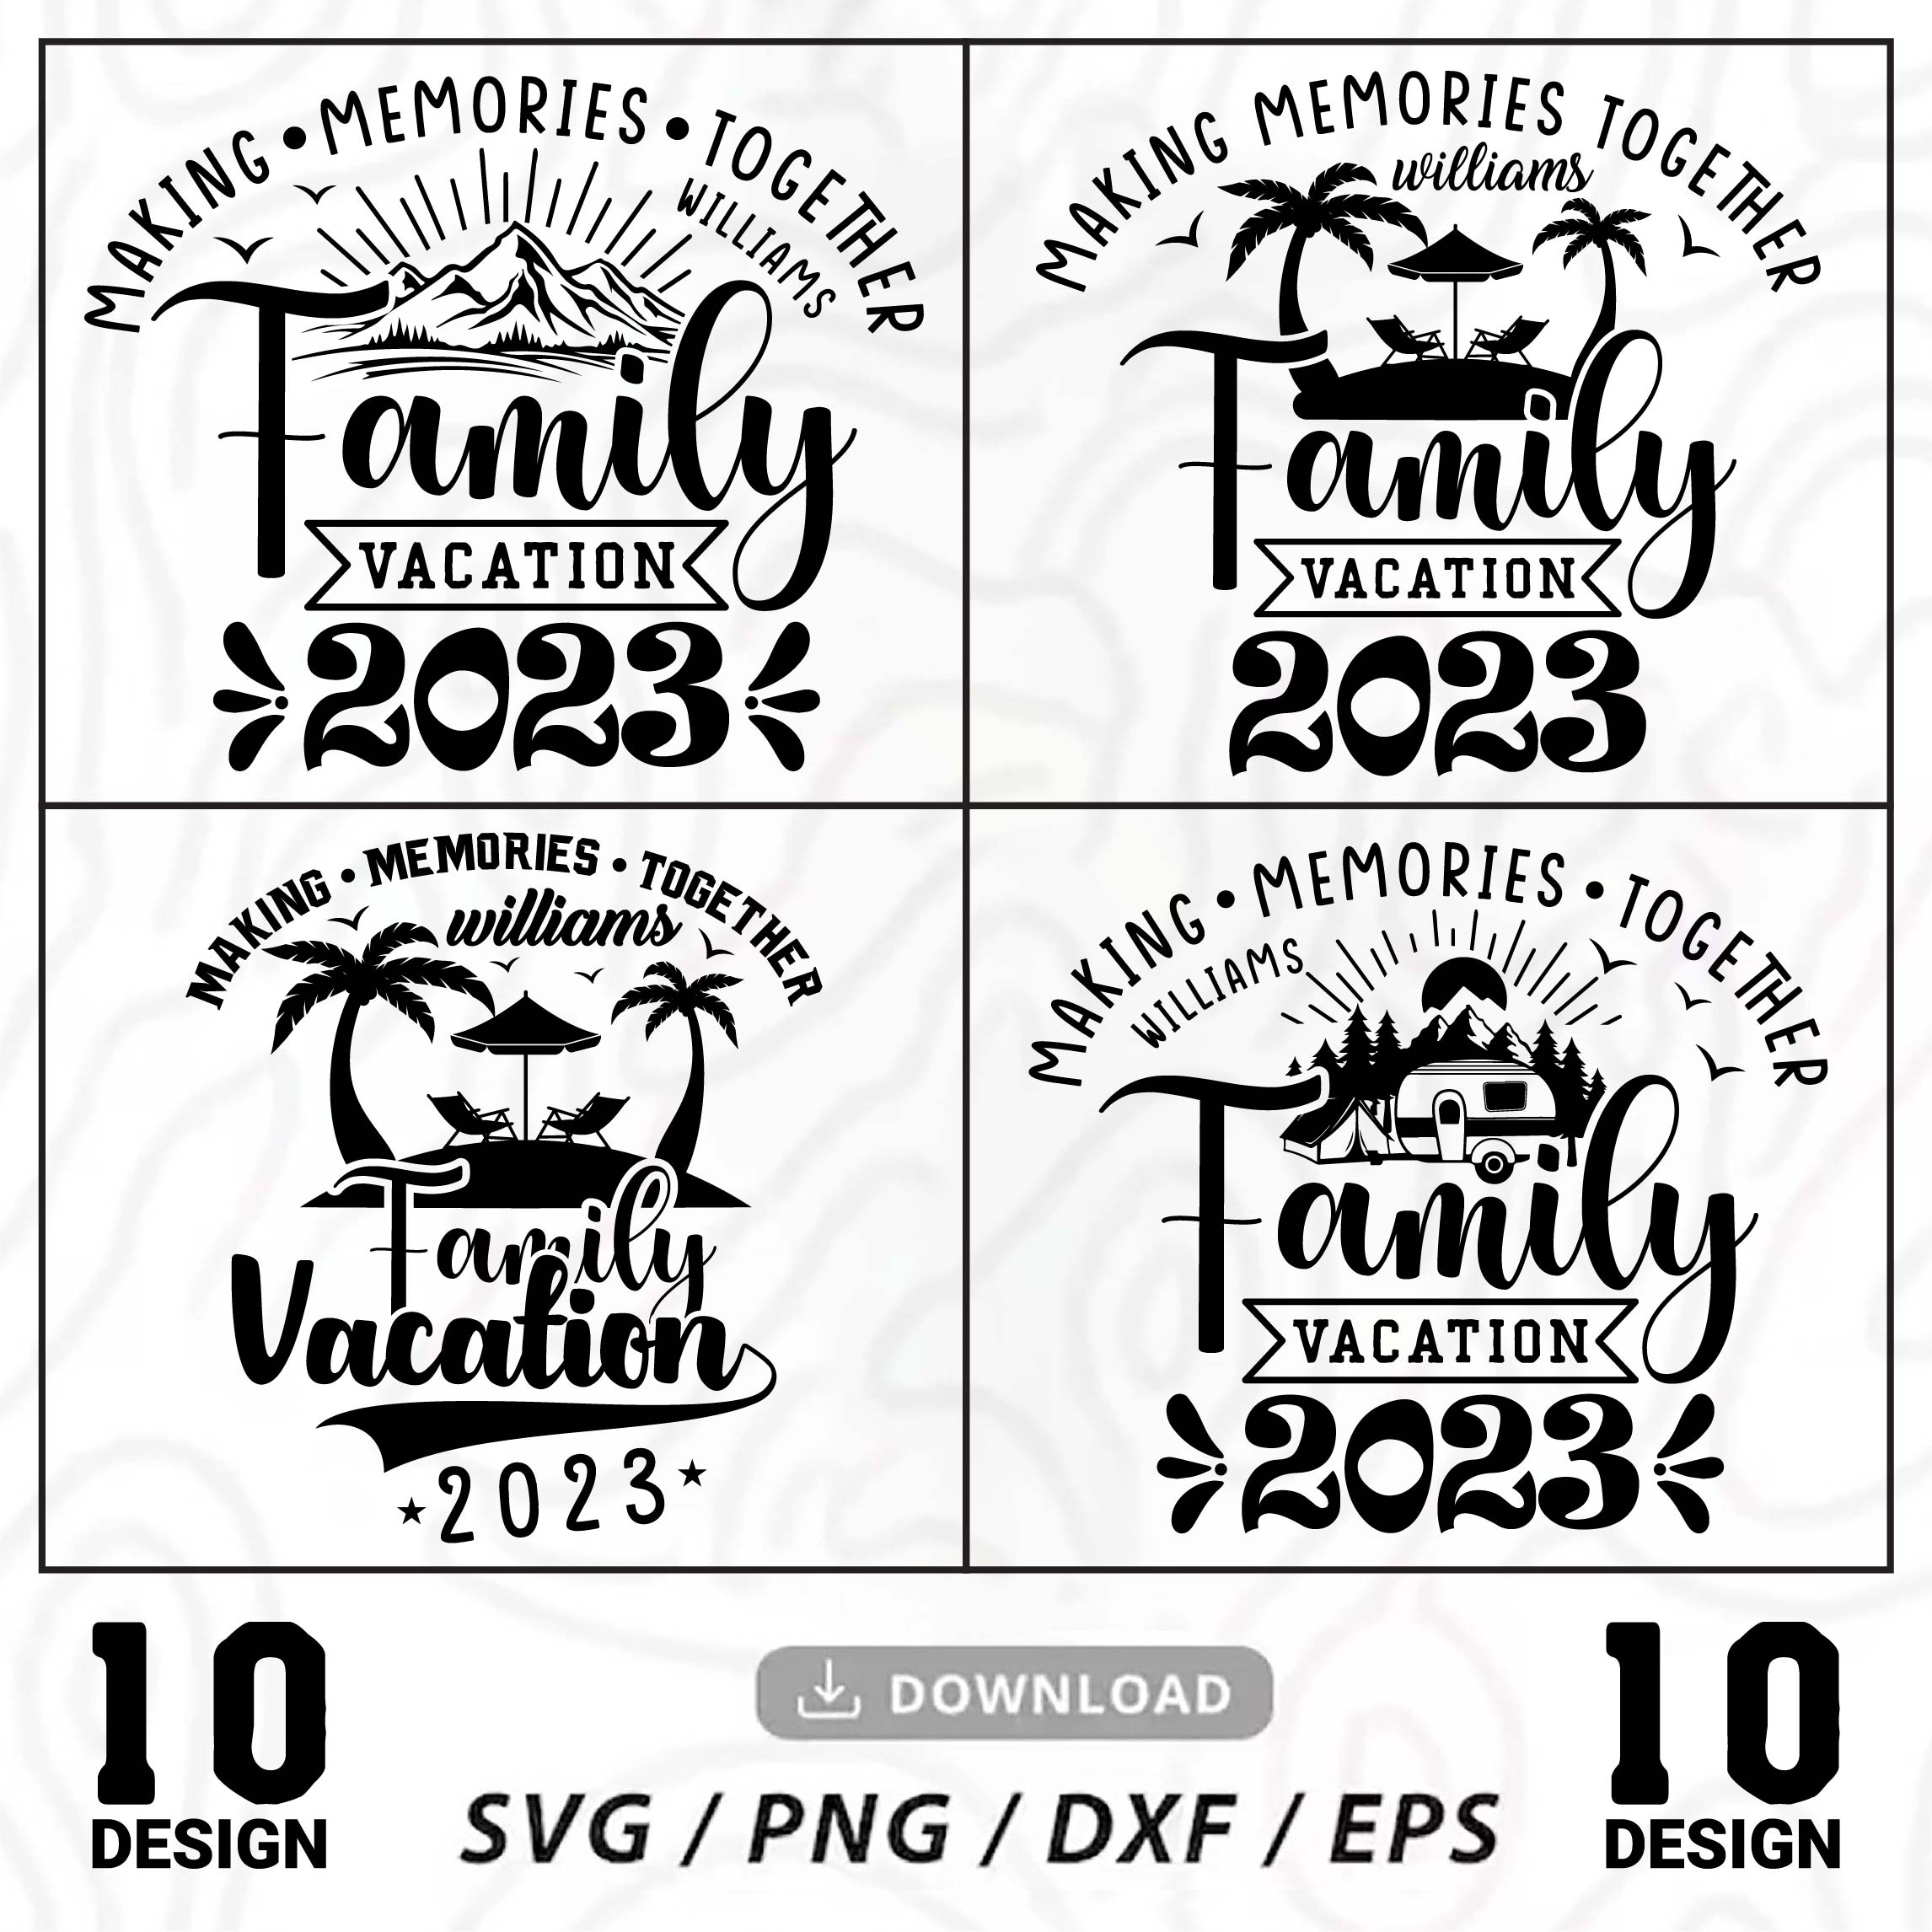 Family Vacation 2023 SVG, Making Memories together, Custom Family Vacation cut files, Summer 2023 vacations preview image.